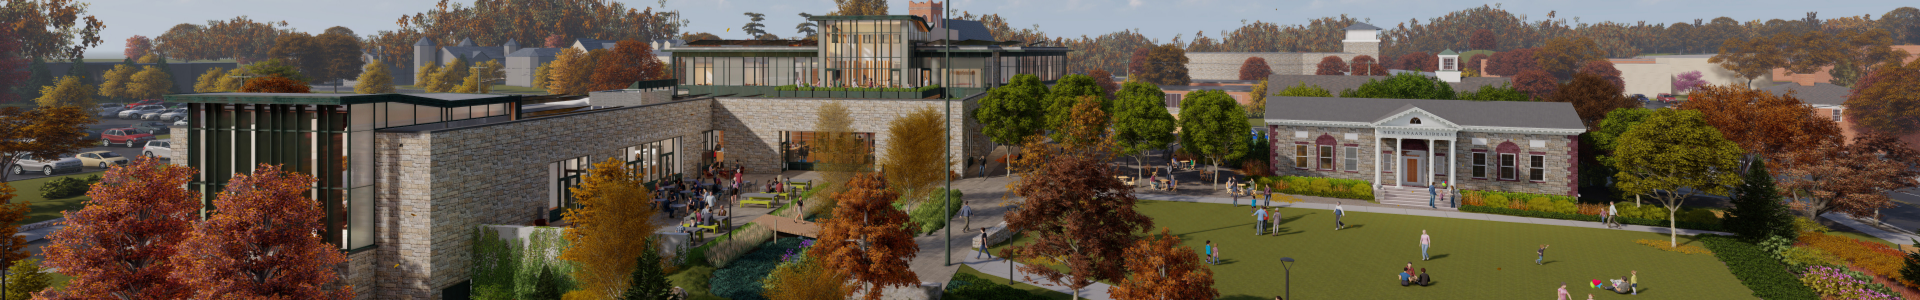 Rendering of the New Canaan Library exterior